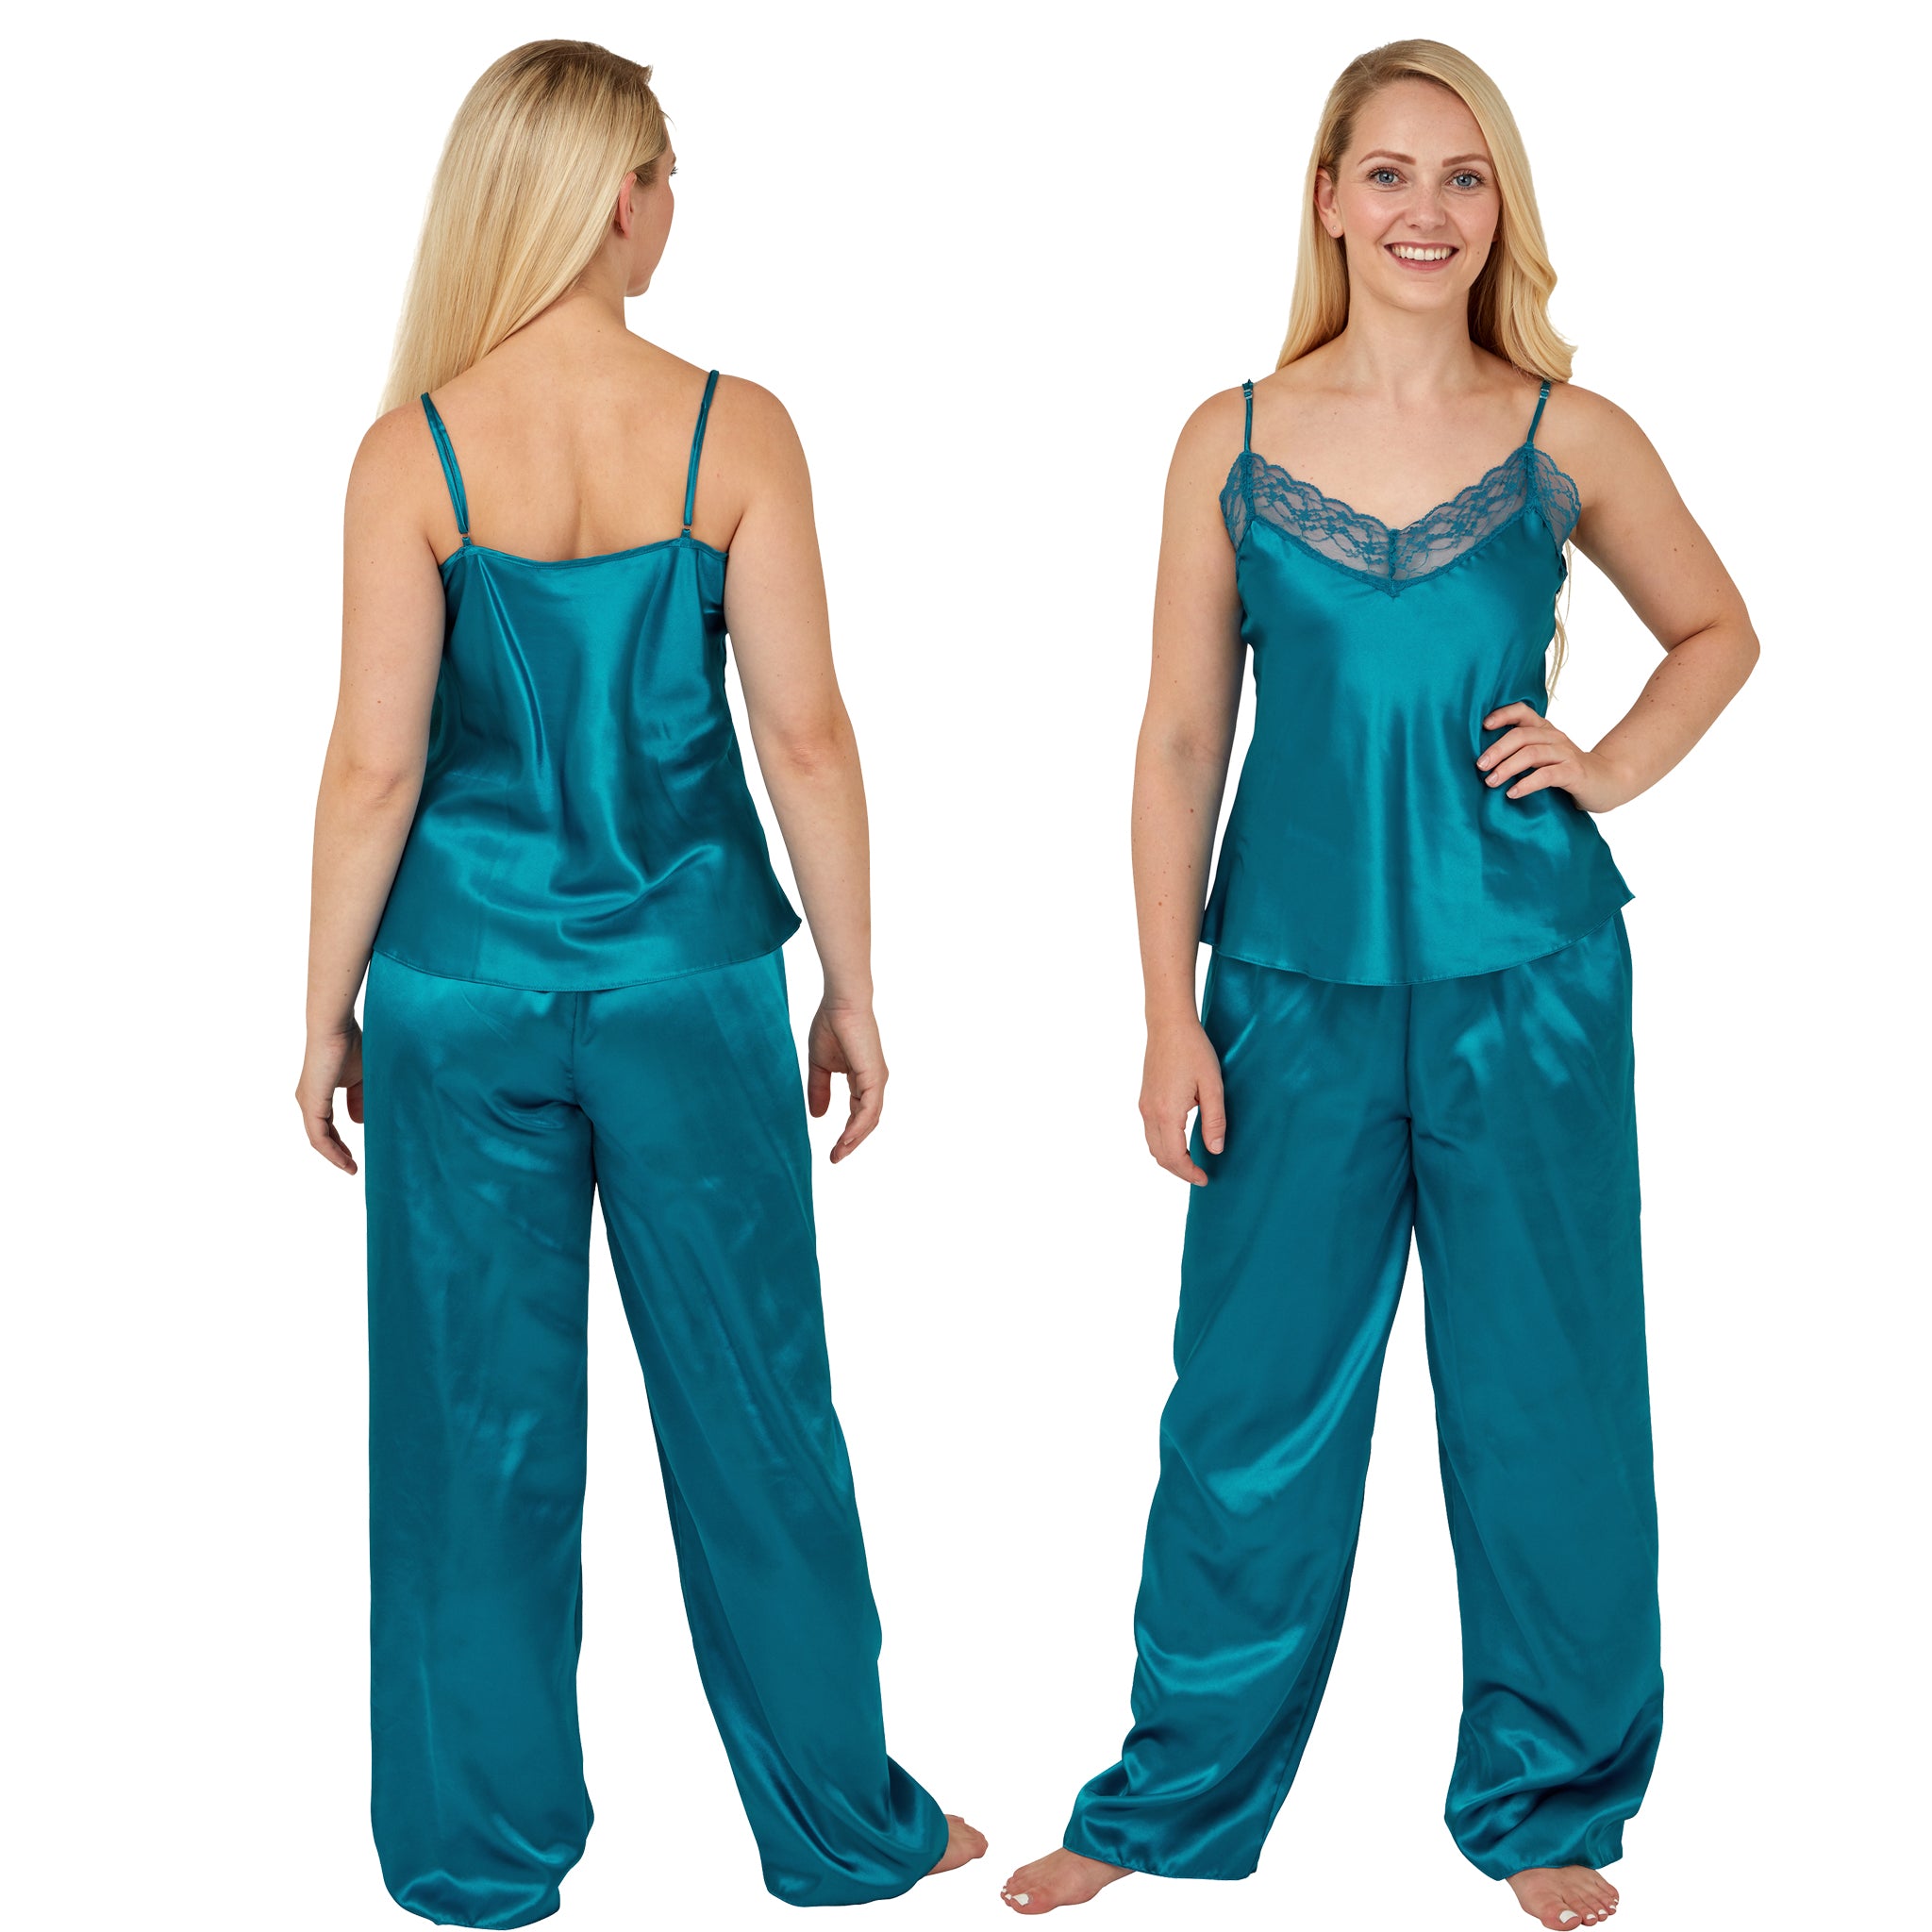 Sexy Satin Lace Plain Teal Blue Pyjamas PJs Cami Top Negligee Lingerie –  Just For You Boutique®